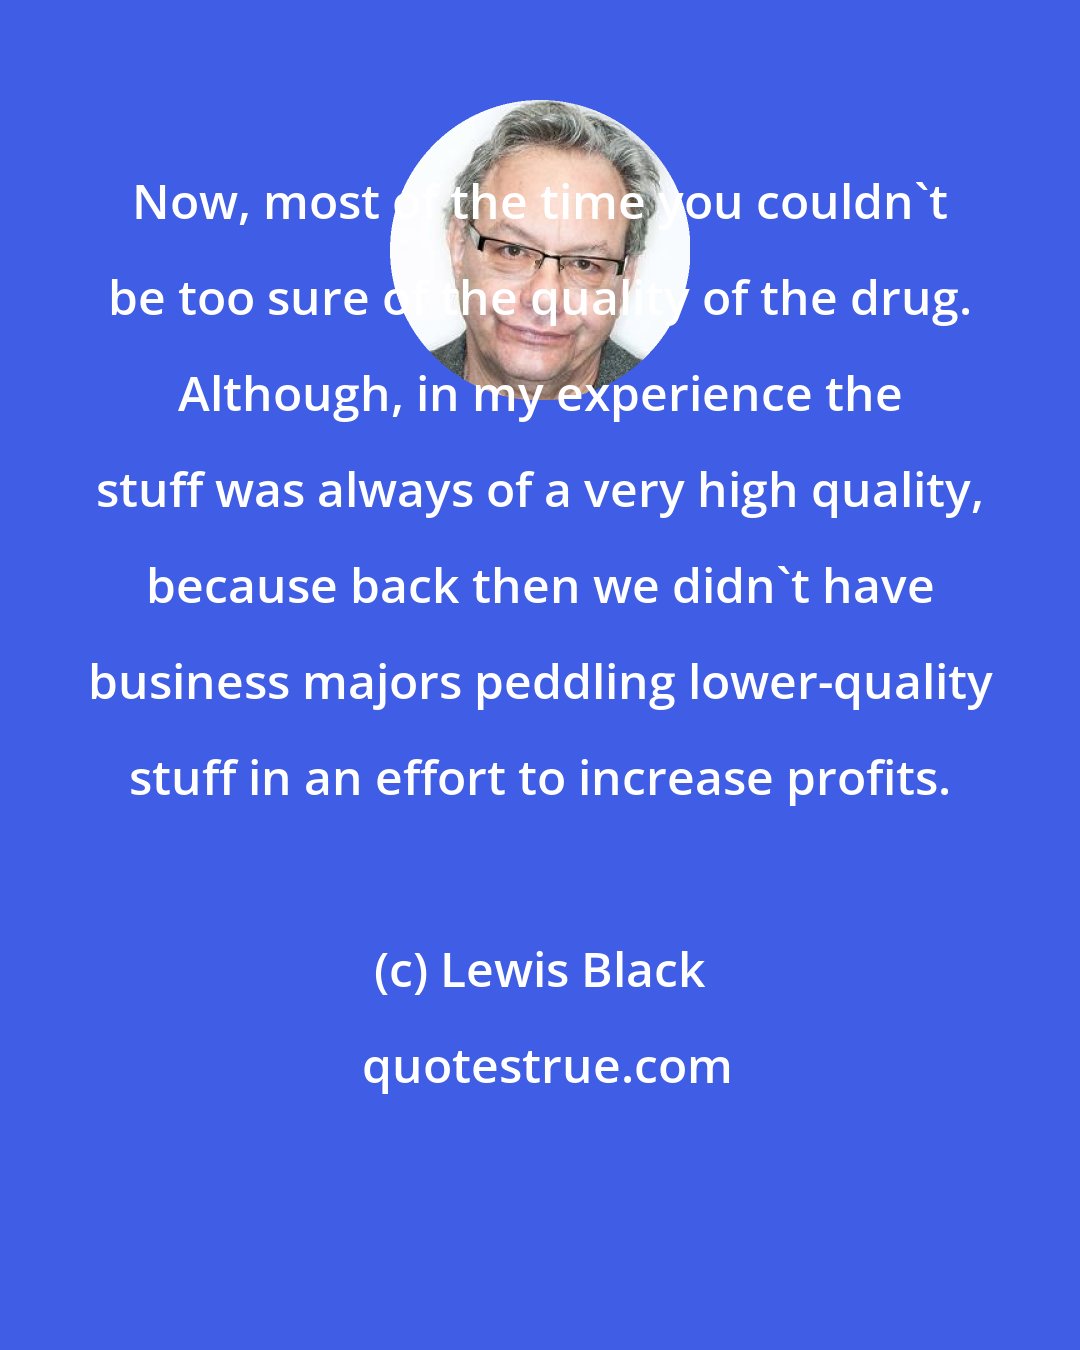 Lewis Black: Now, most of the time you couldn't be too sure of the quality of the drug. Although, in my experience the stuff was always of a very high quality, because back then we didn't have business majors peddling lower-quality stuff in an effort to increase profits.